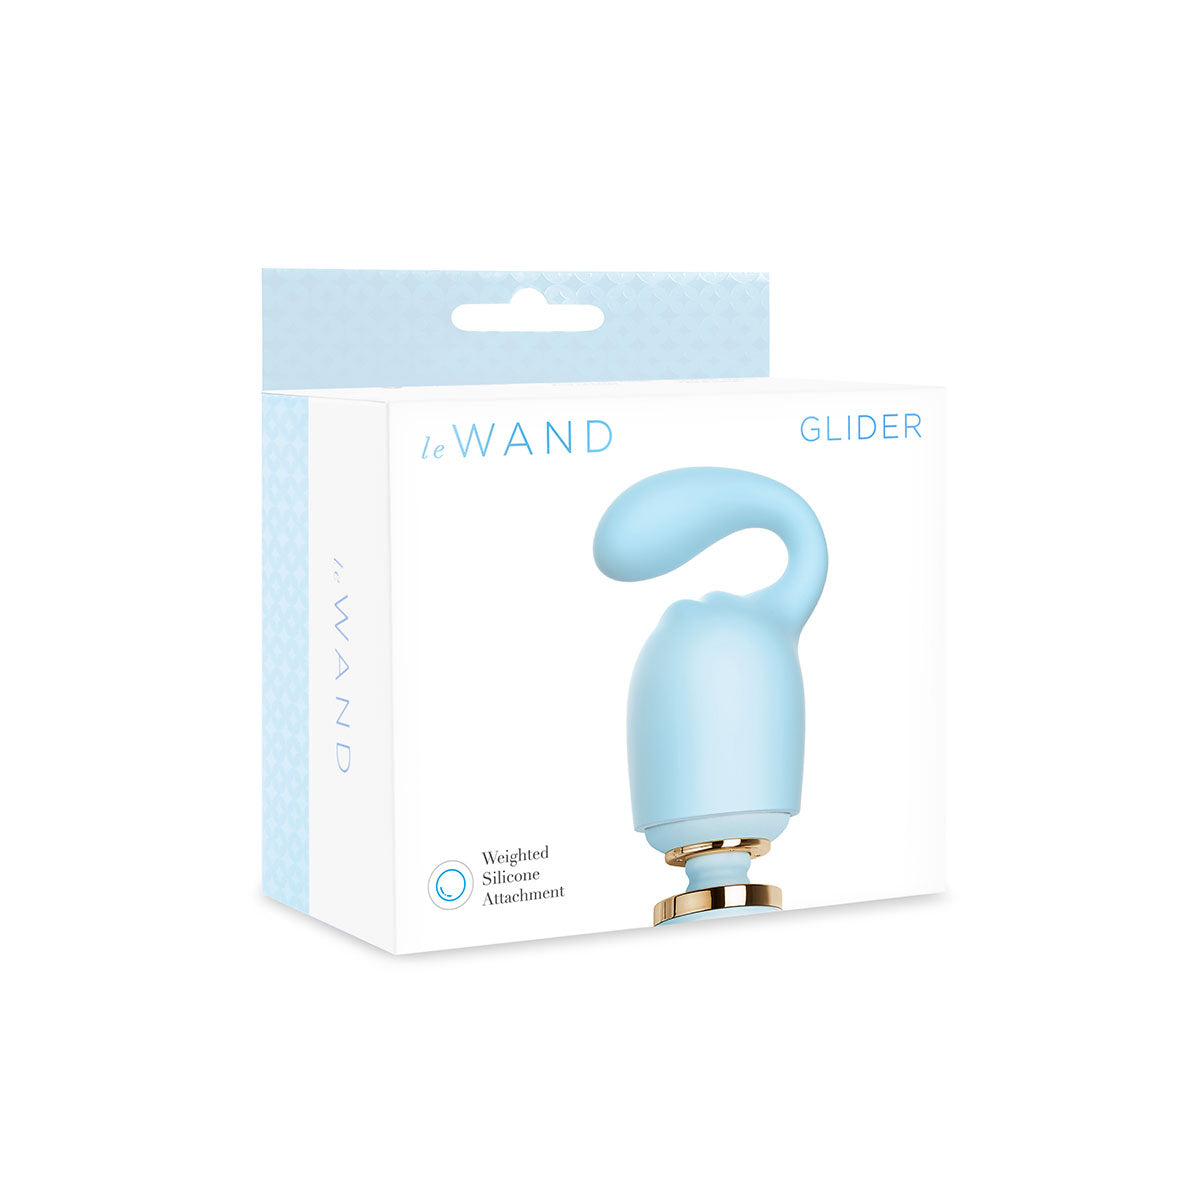 Le Wand Glider Weighted Silicone Attachment Intimates Adult Boutique